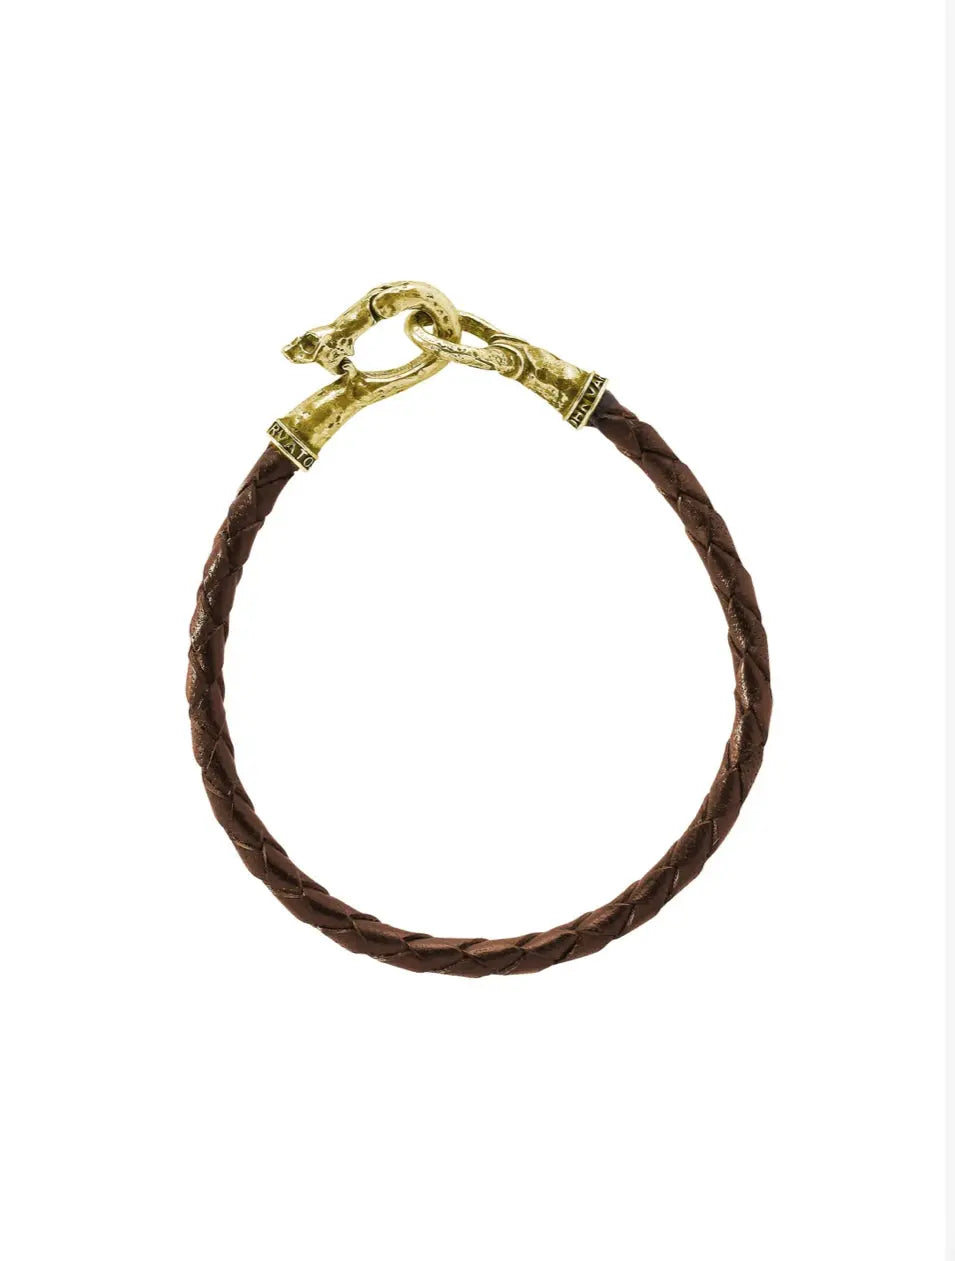 Sterling Silver Single Strand Bracelet, Braided, from the Leather Collection  Length: 8 inches  Designed by John Varvatos